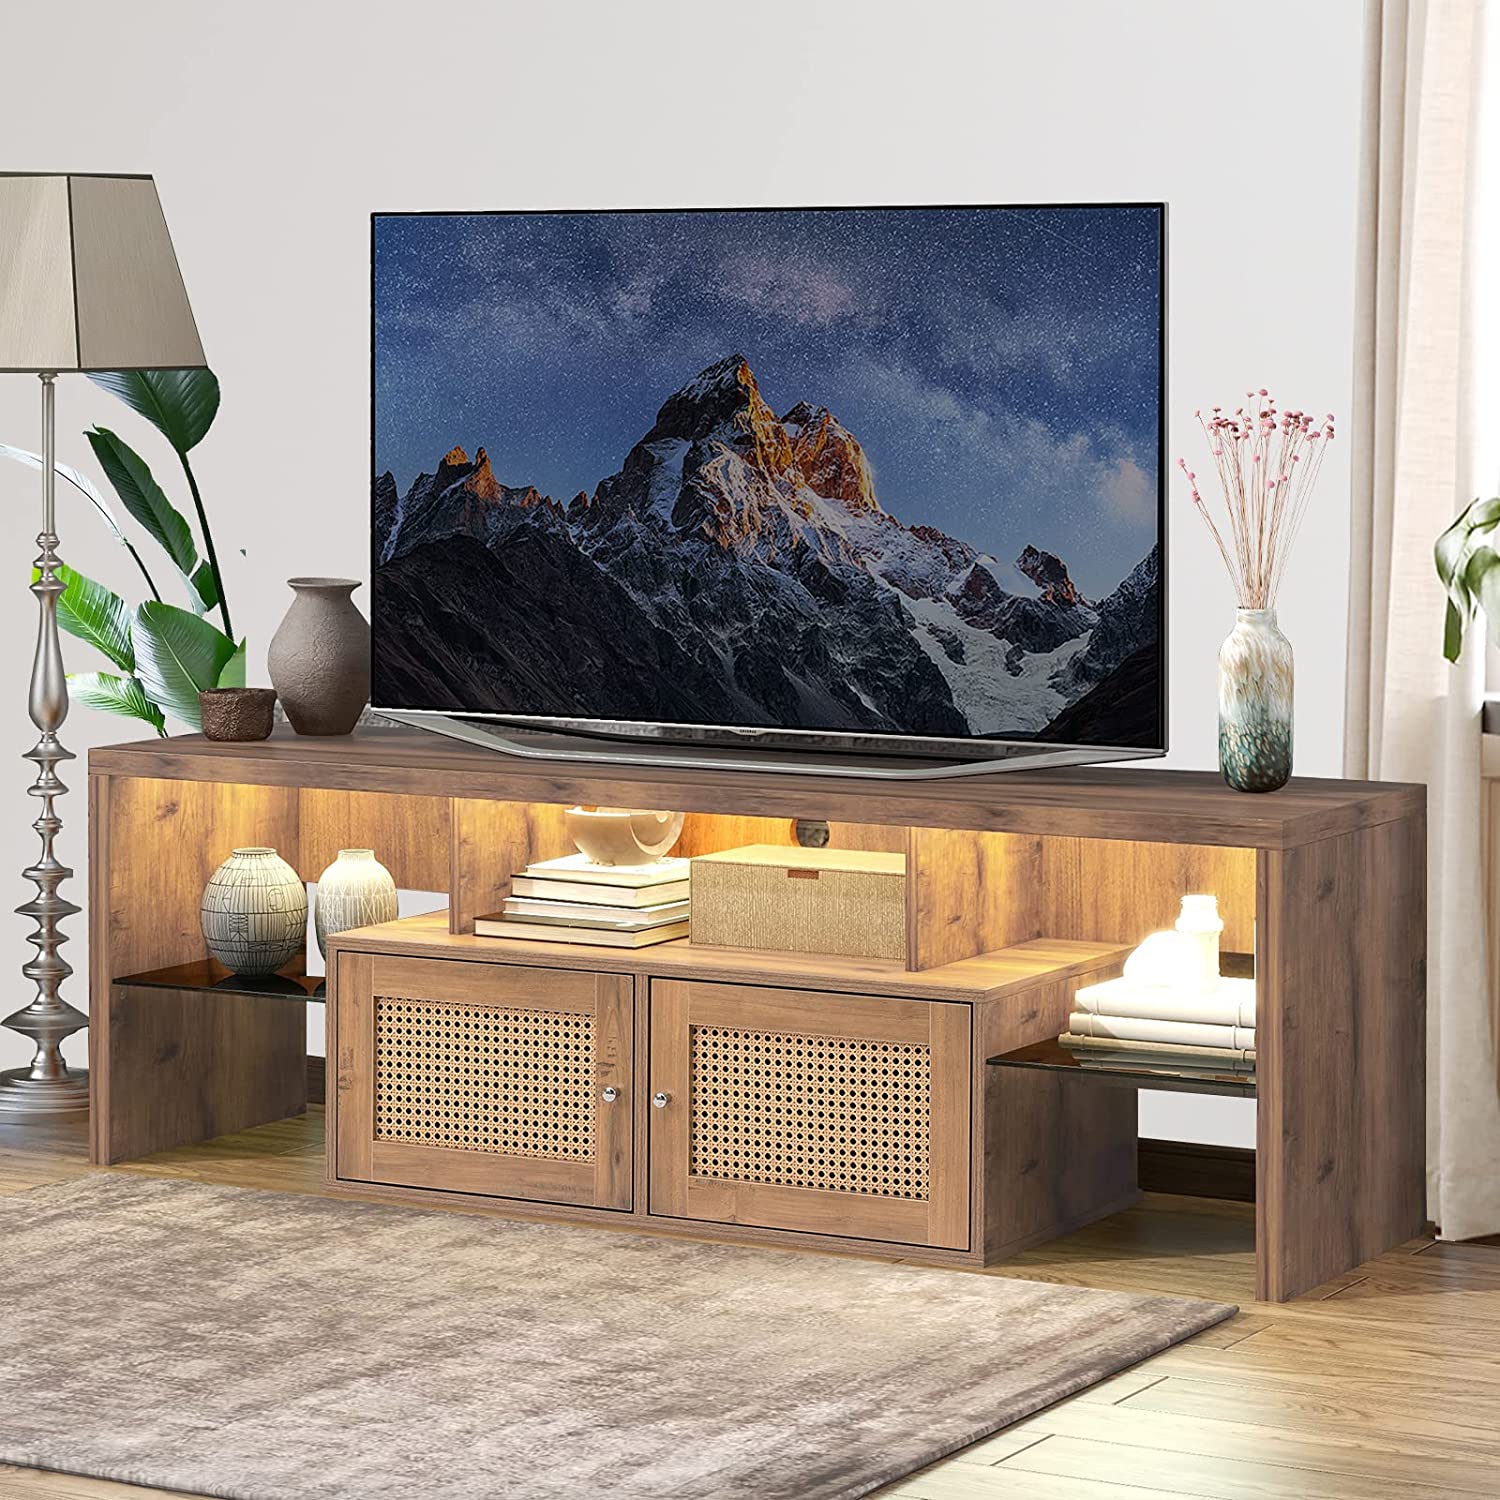 59" Rattan Cane TV Console Stand